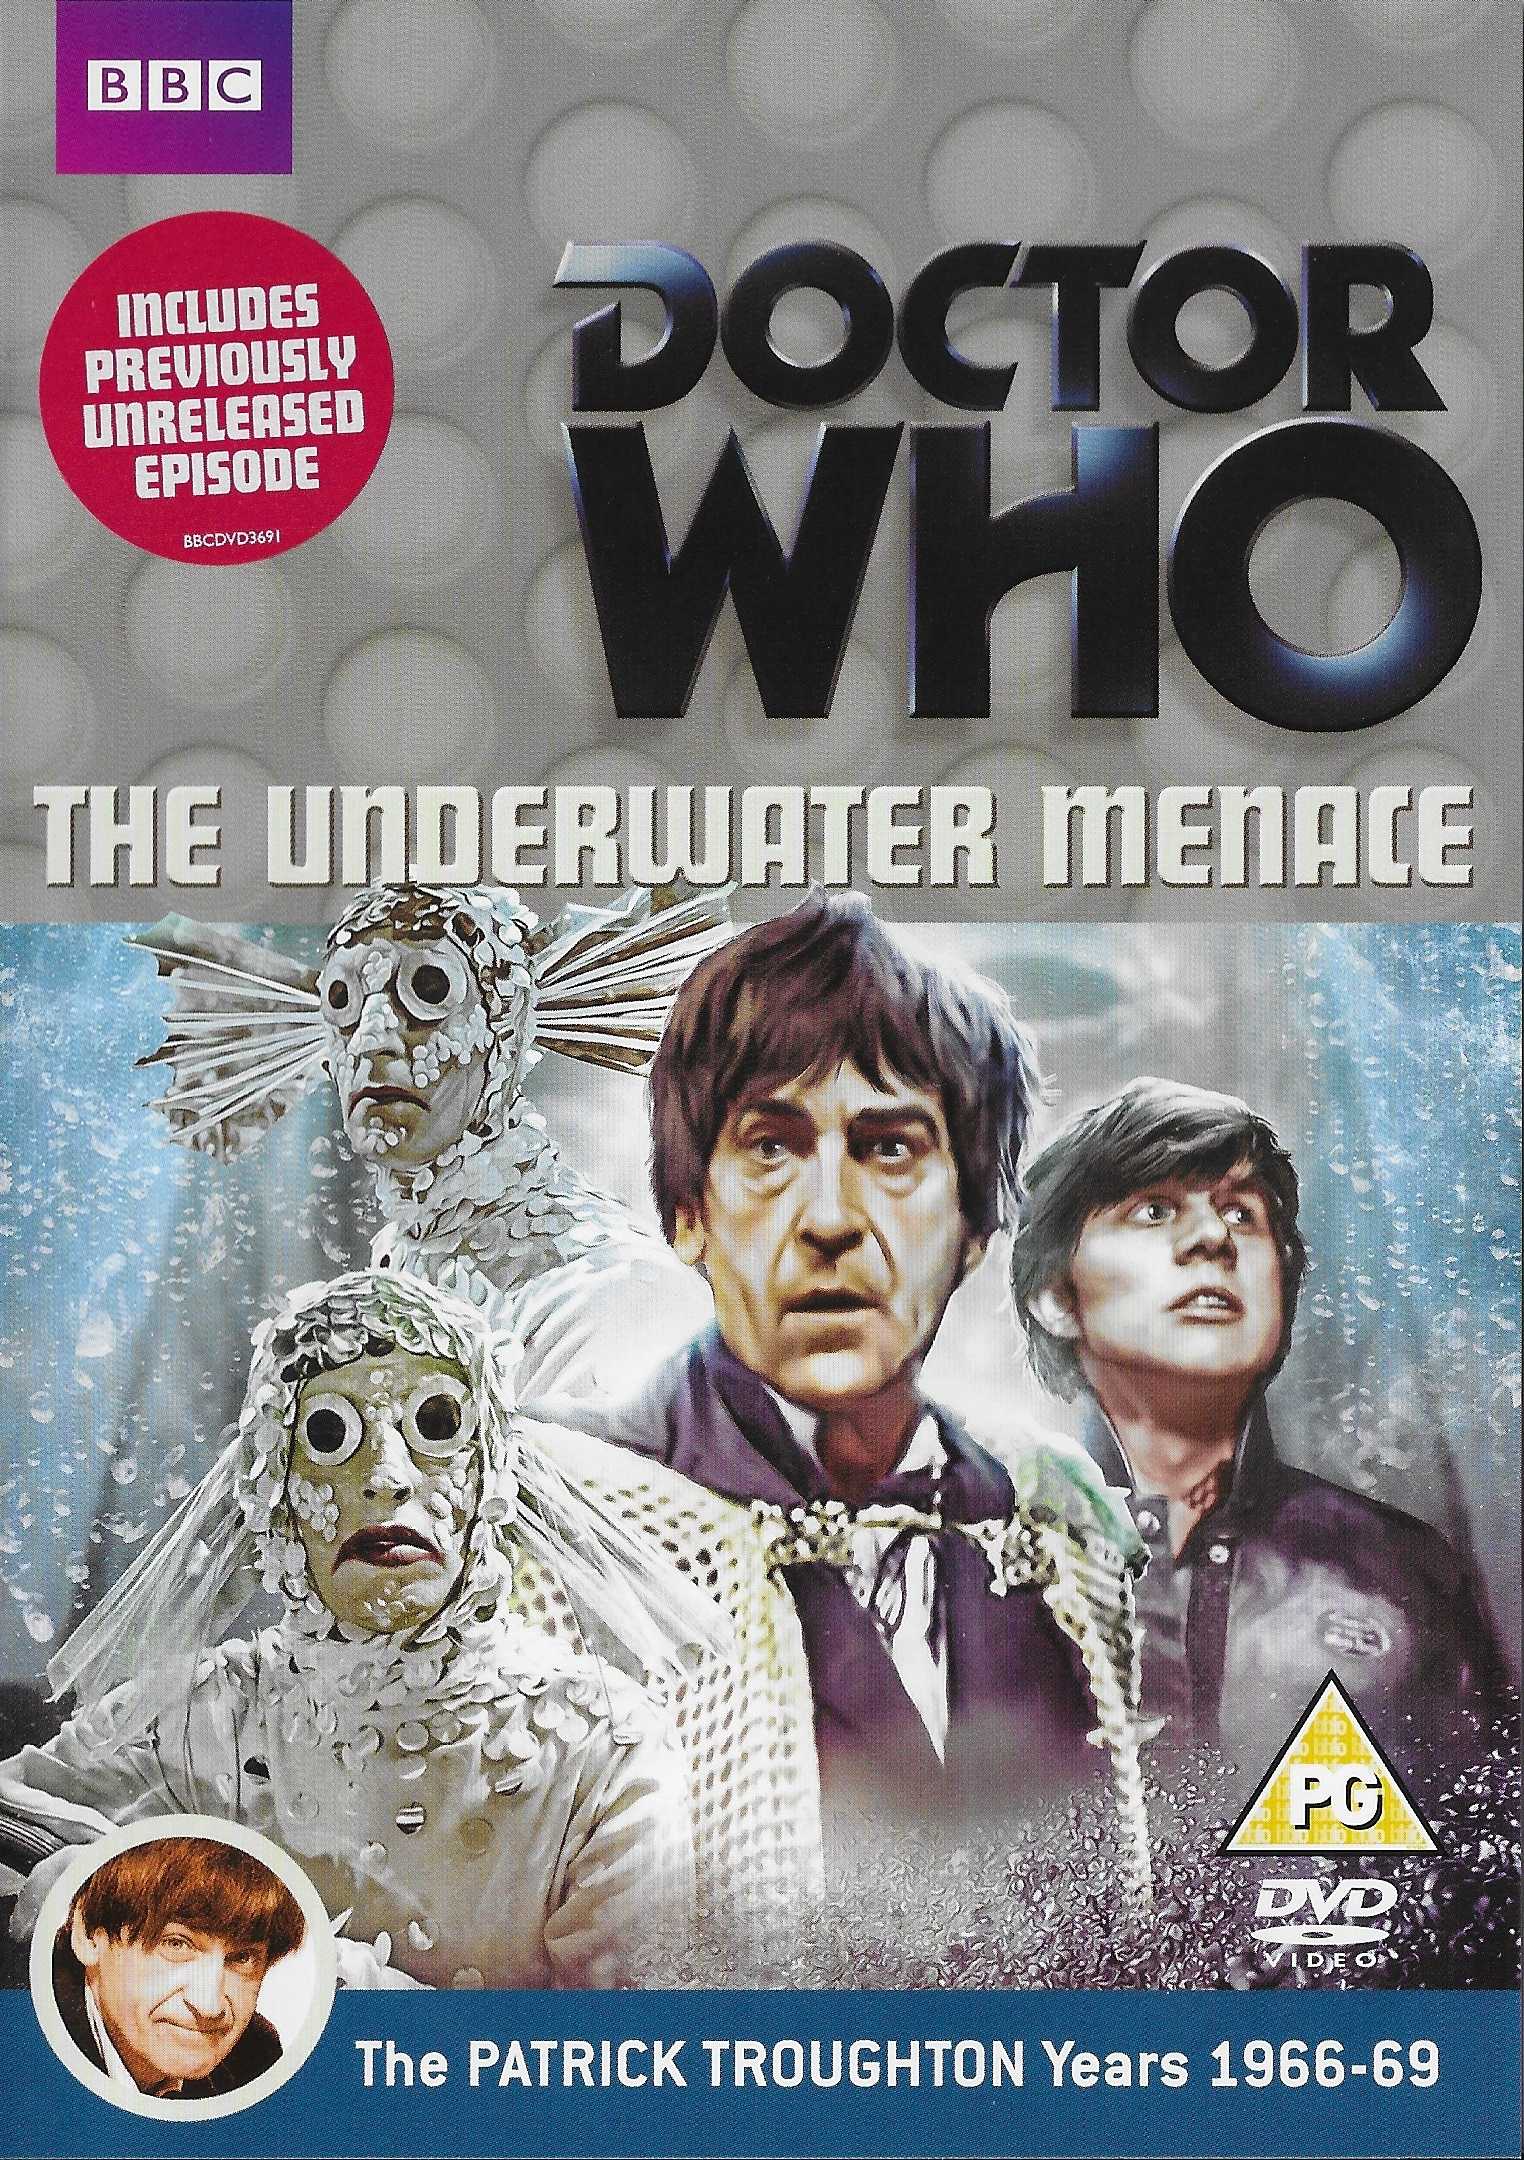 Picture of BBCDVD 3691 Doctor Who - The underwater menace by artist Geoffrey Orme from the BBC records and Tapes library